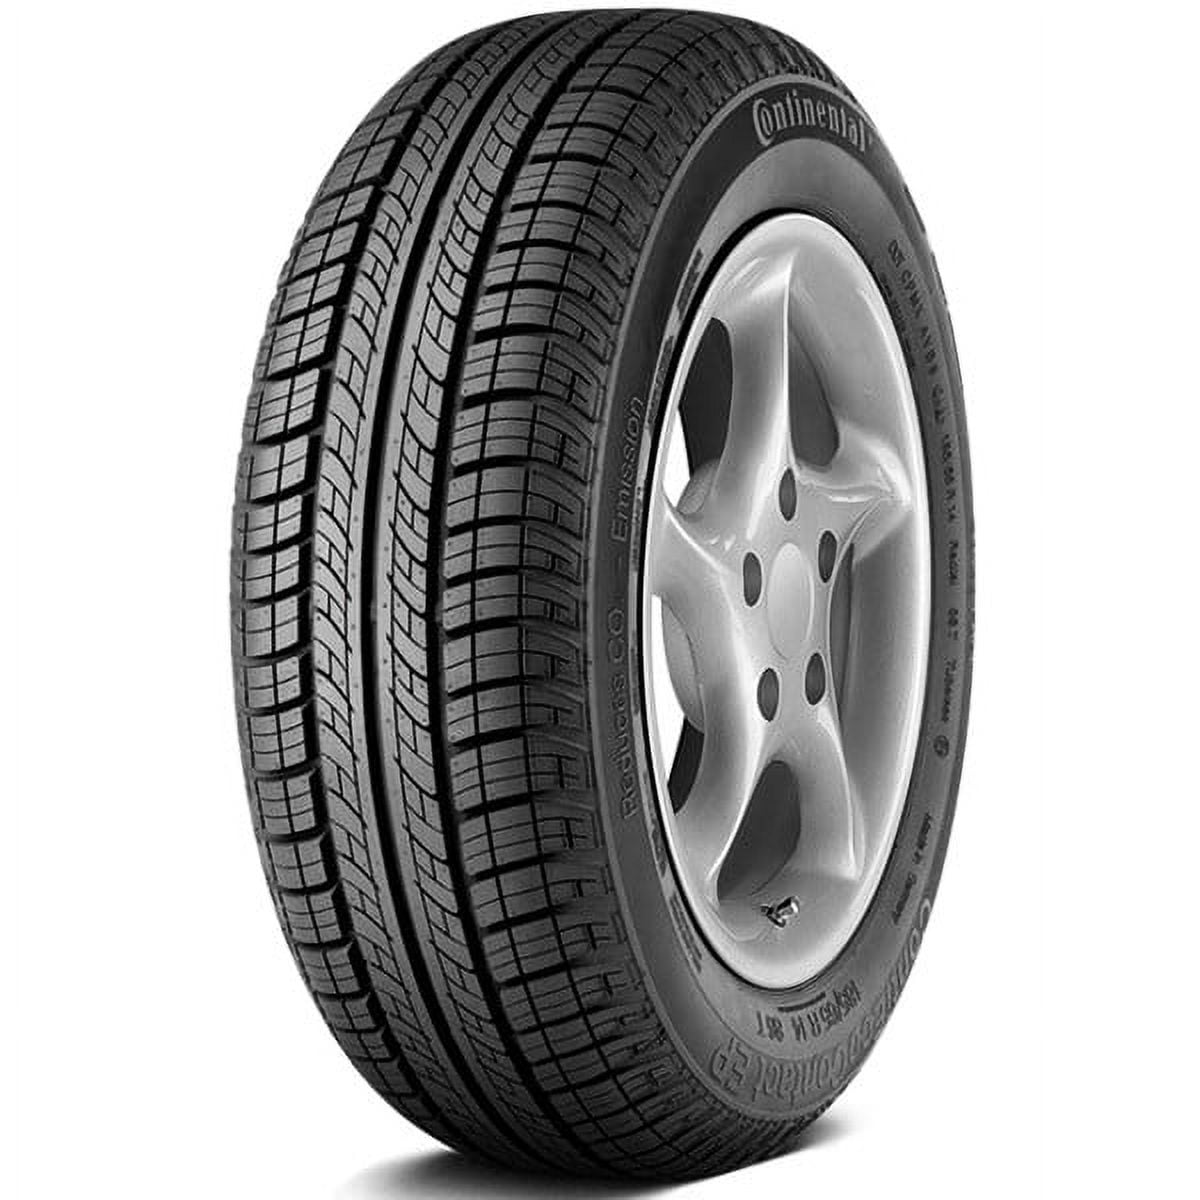 Continental ContiEcoContact EP Summer 145/65R15 72T Passenger Tire